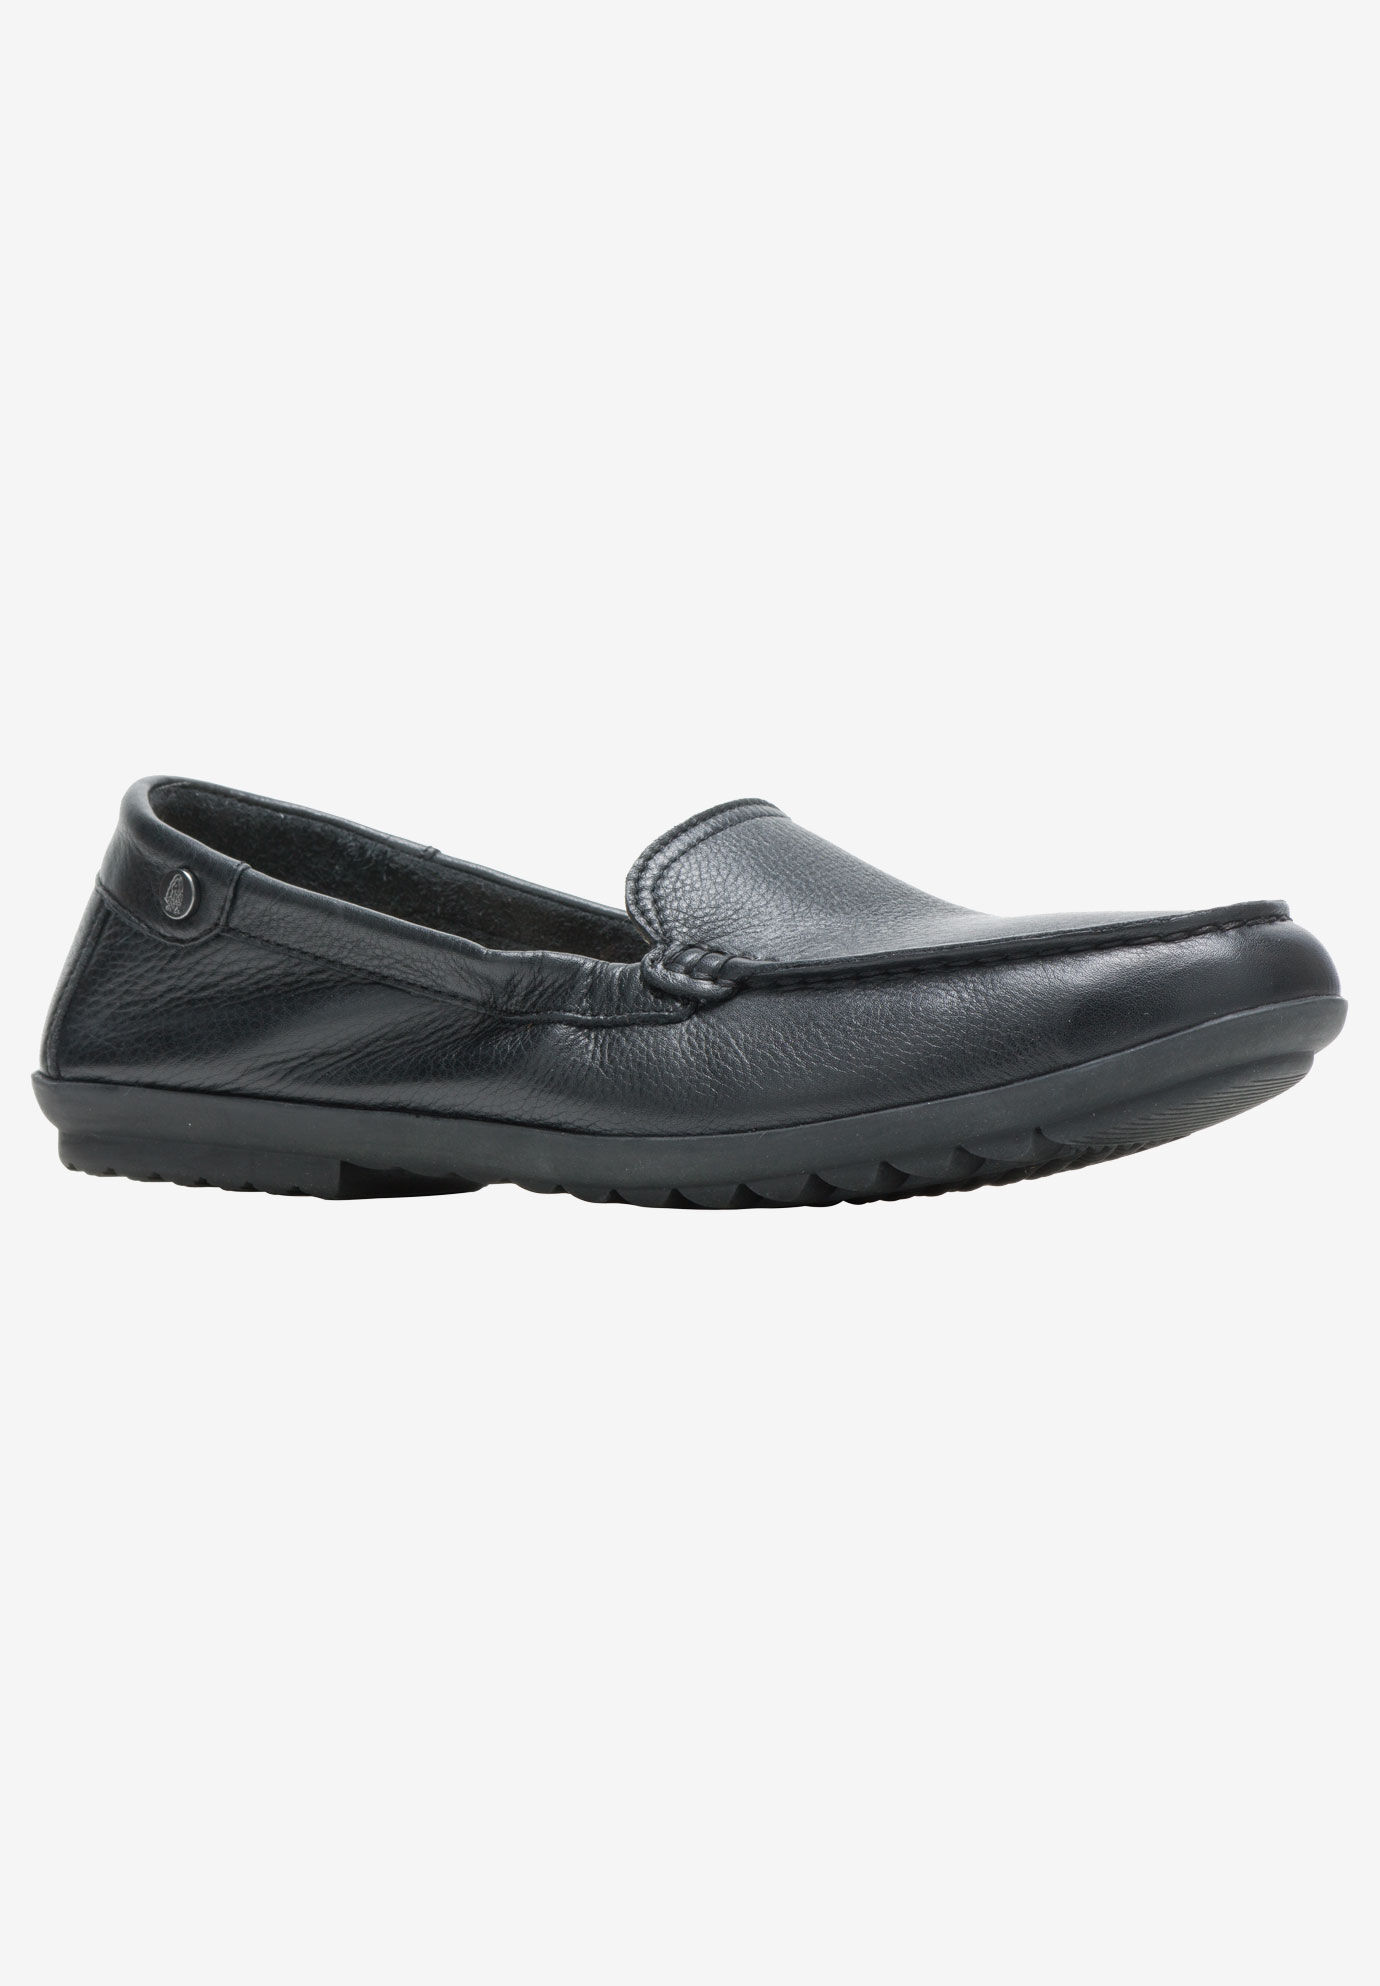 hush puppies extra wide womens shoes